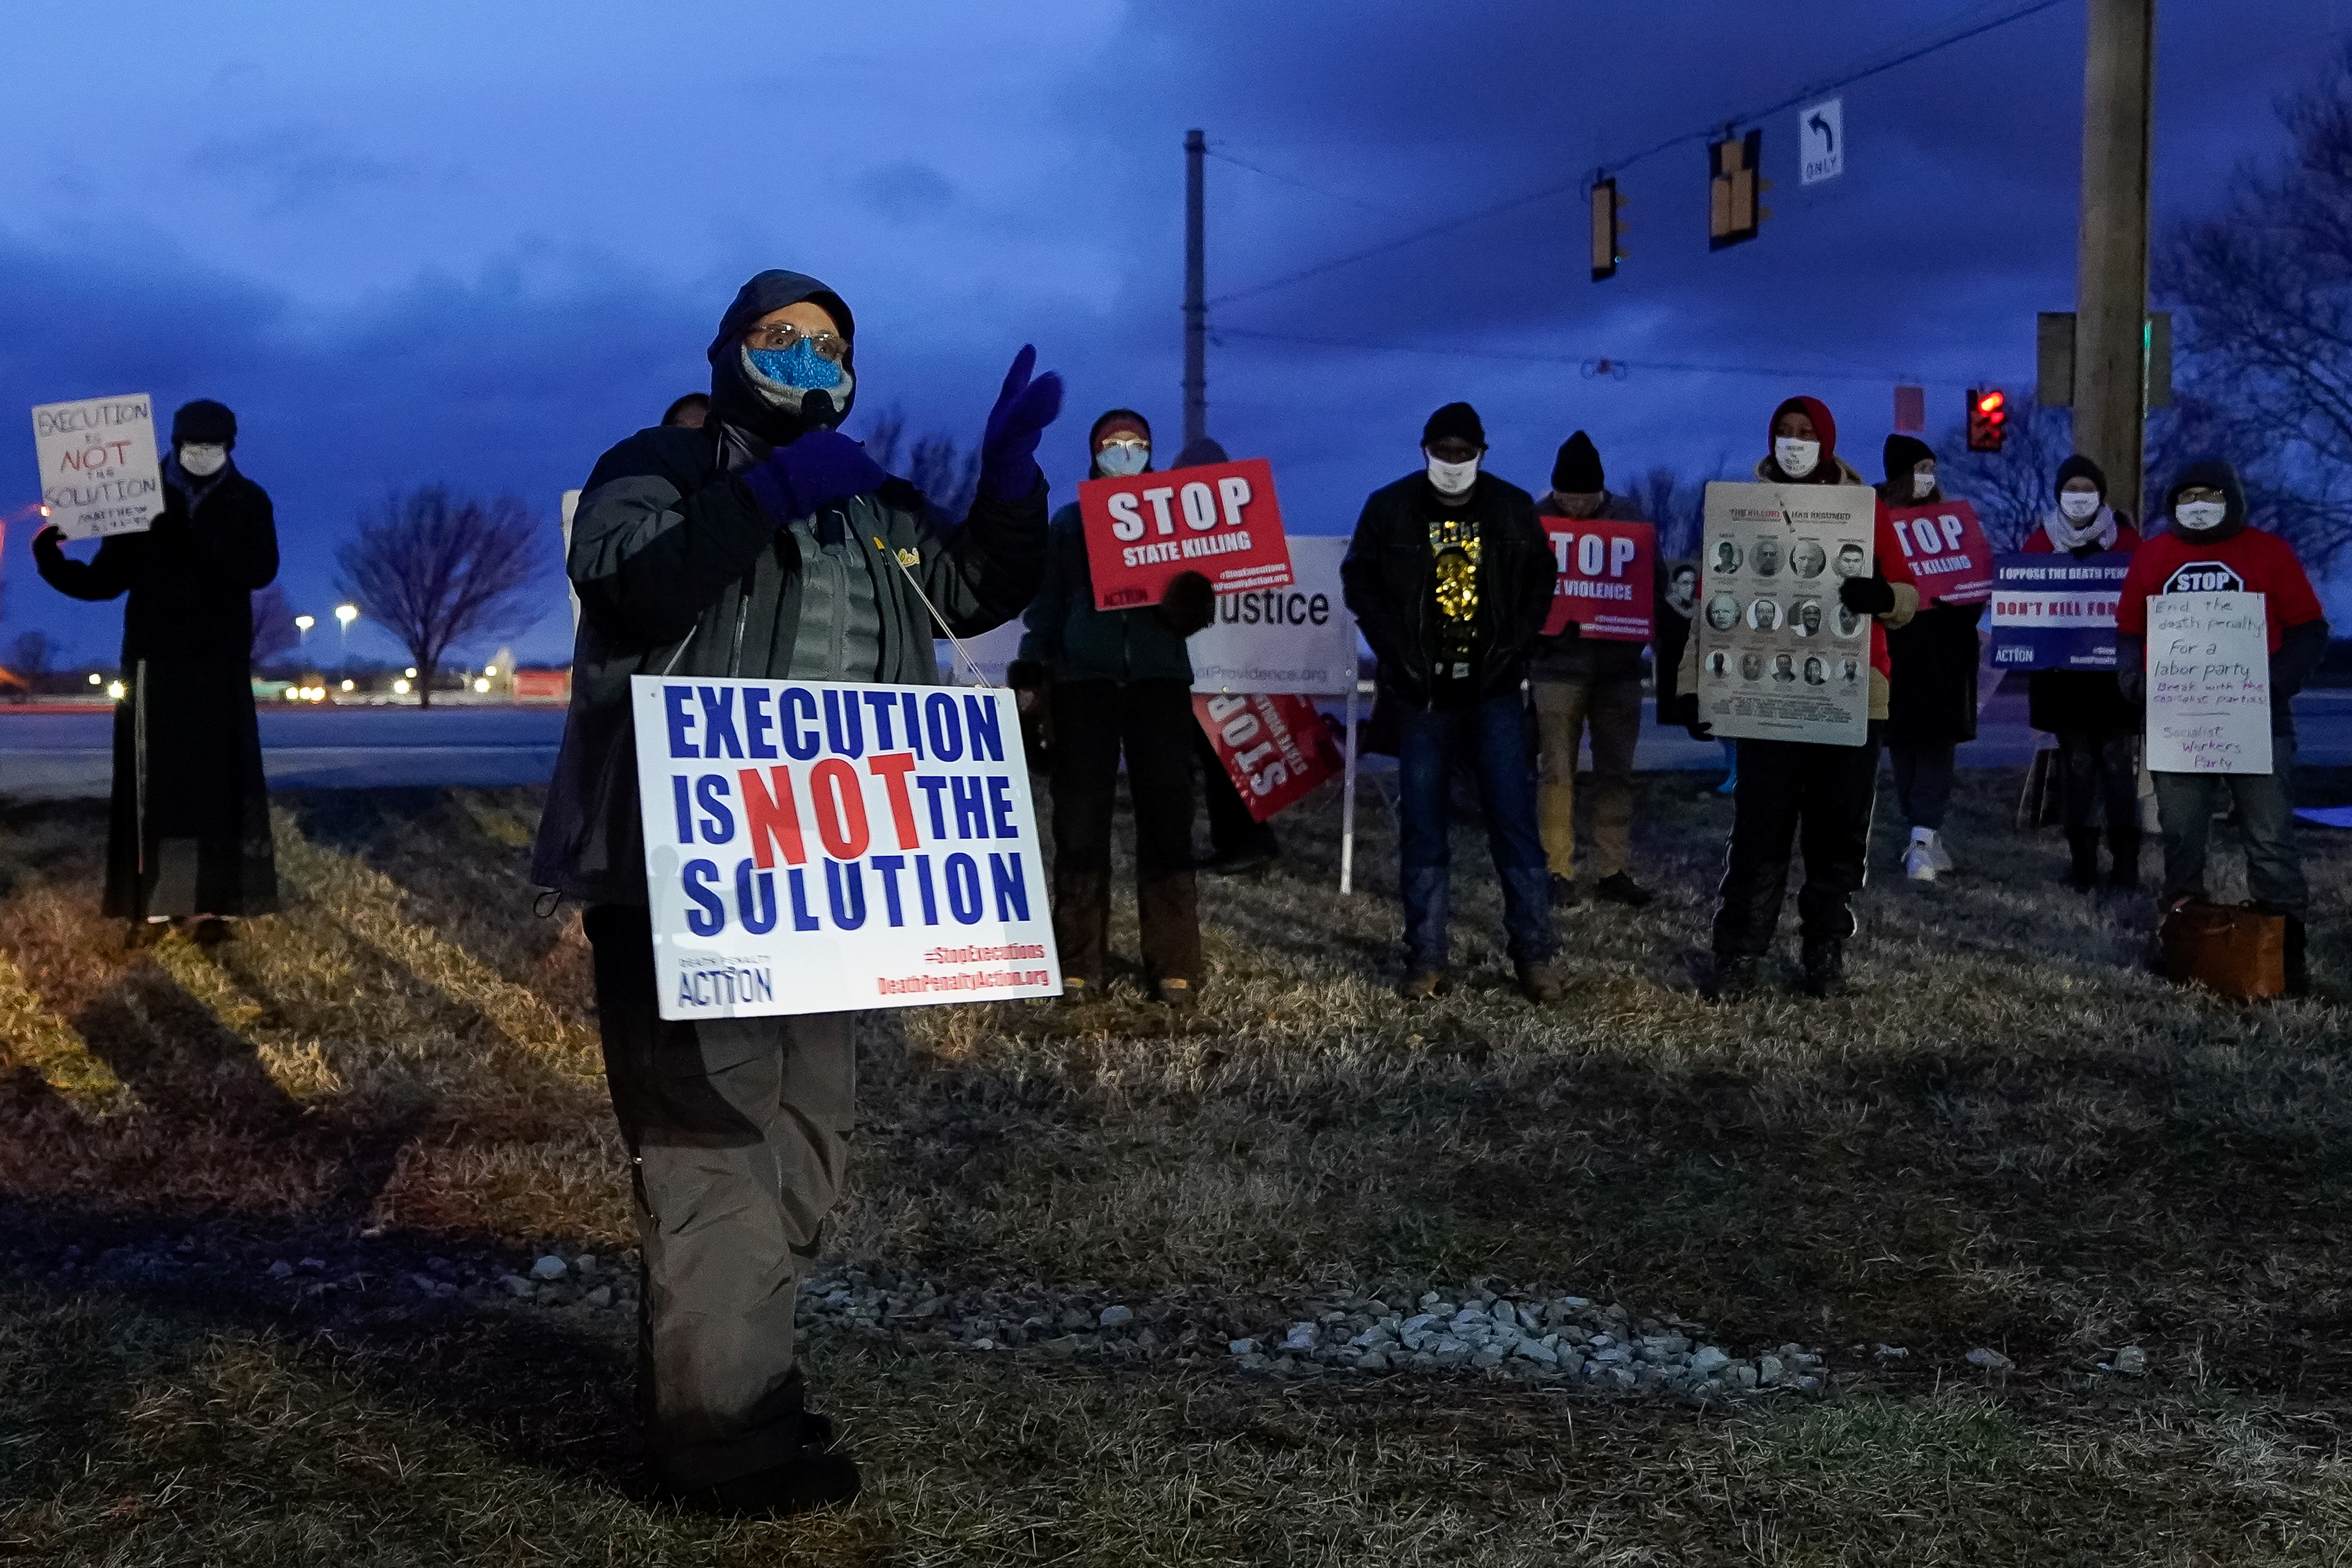 Anti-death penalty protest outside the United States Penitentiary in Terre Haute